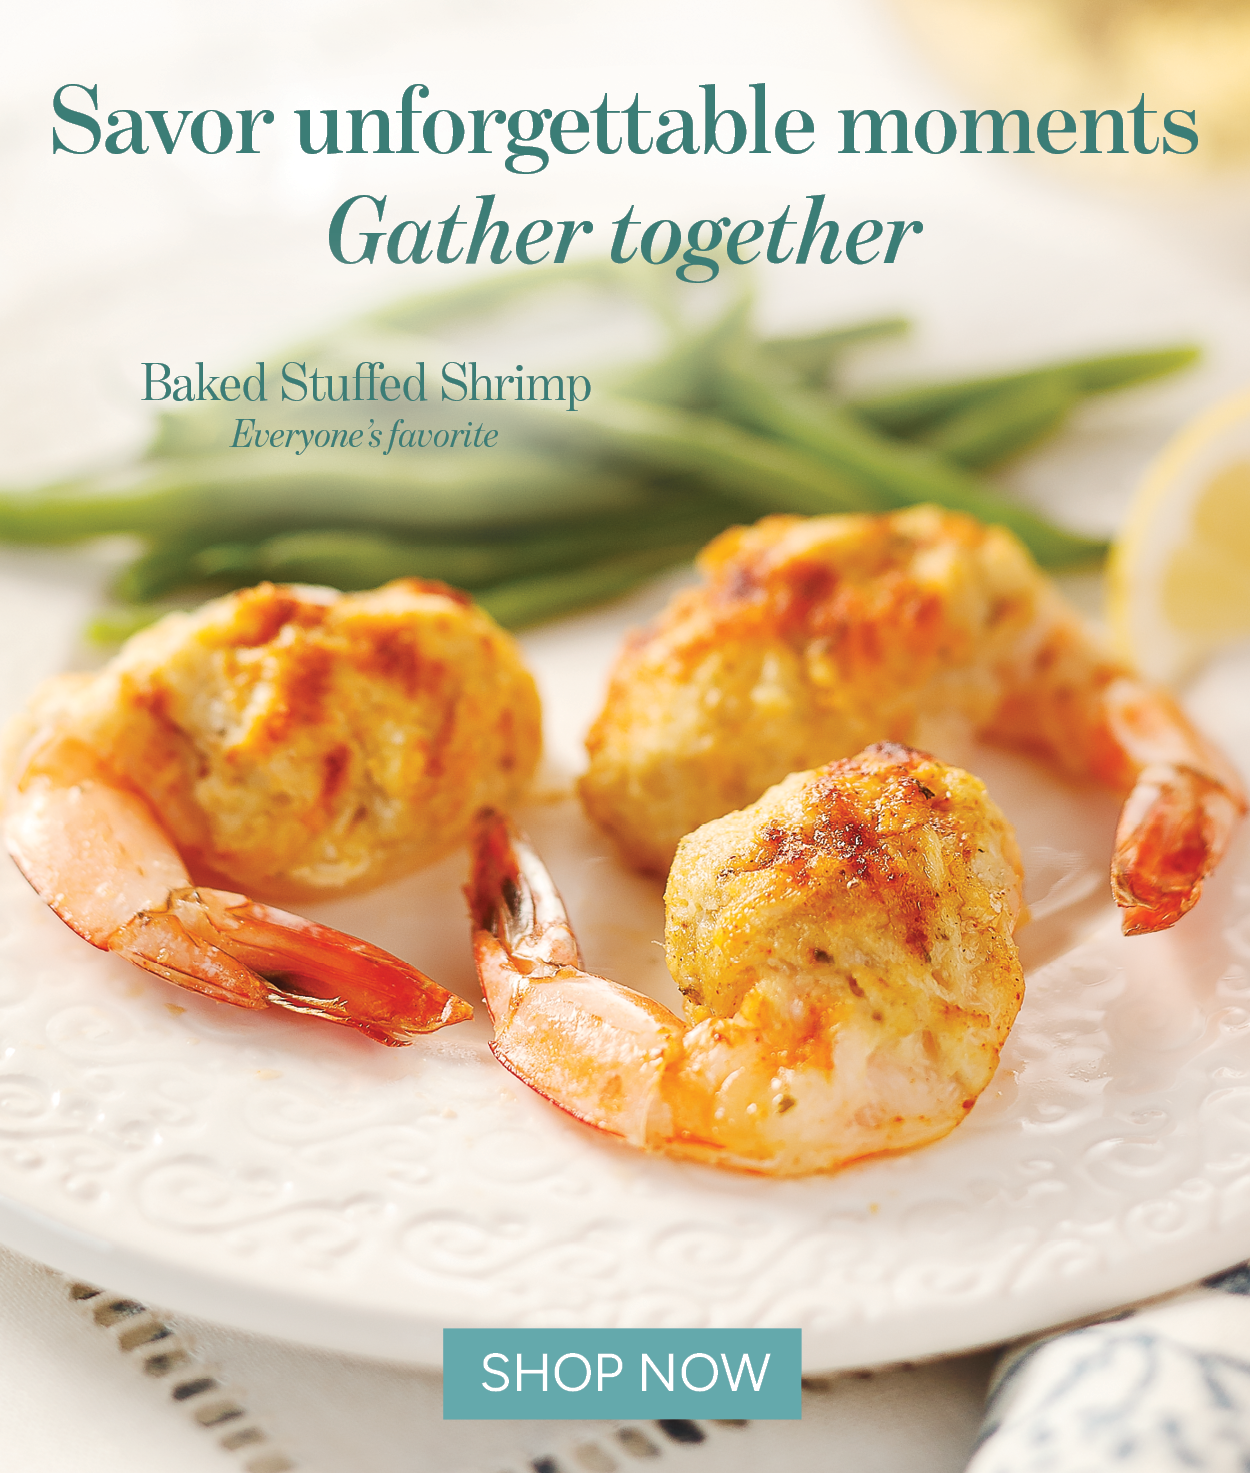 SAVOR unforgettable moments with baked stuffed shrimp